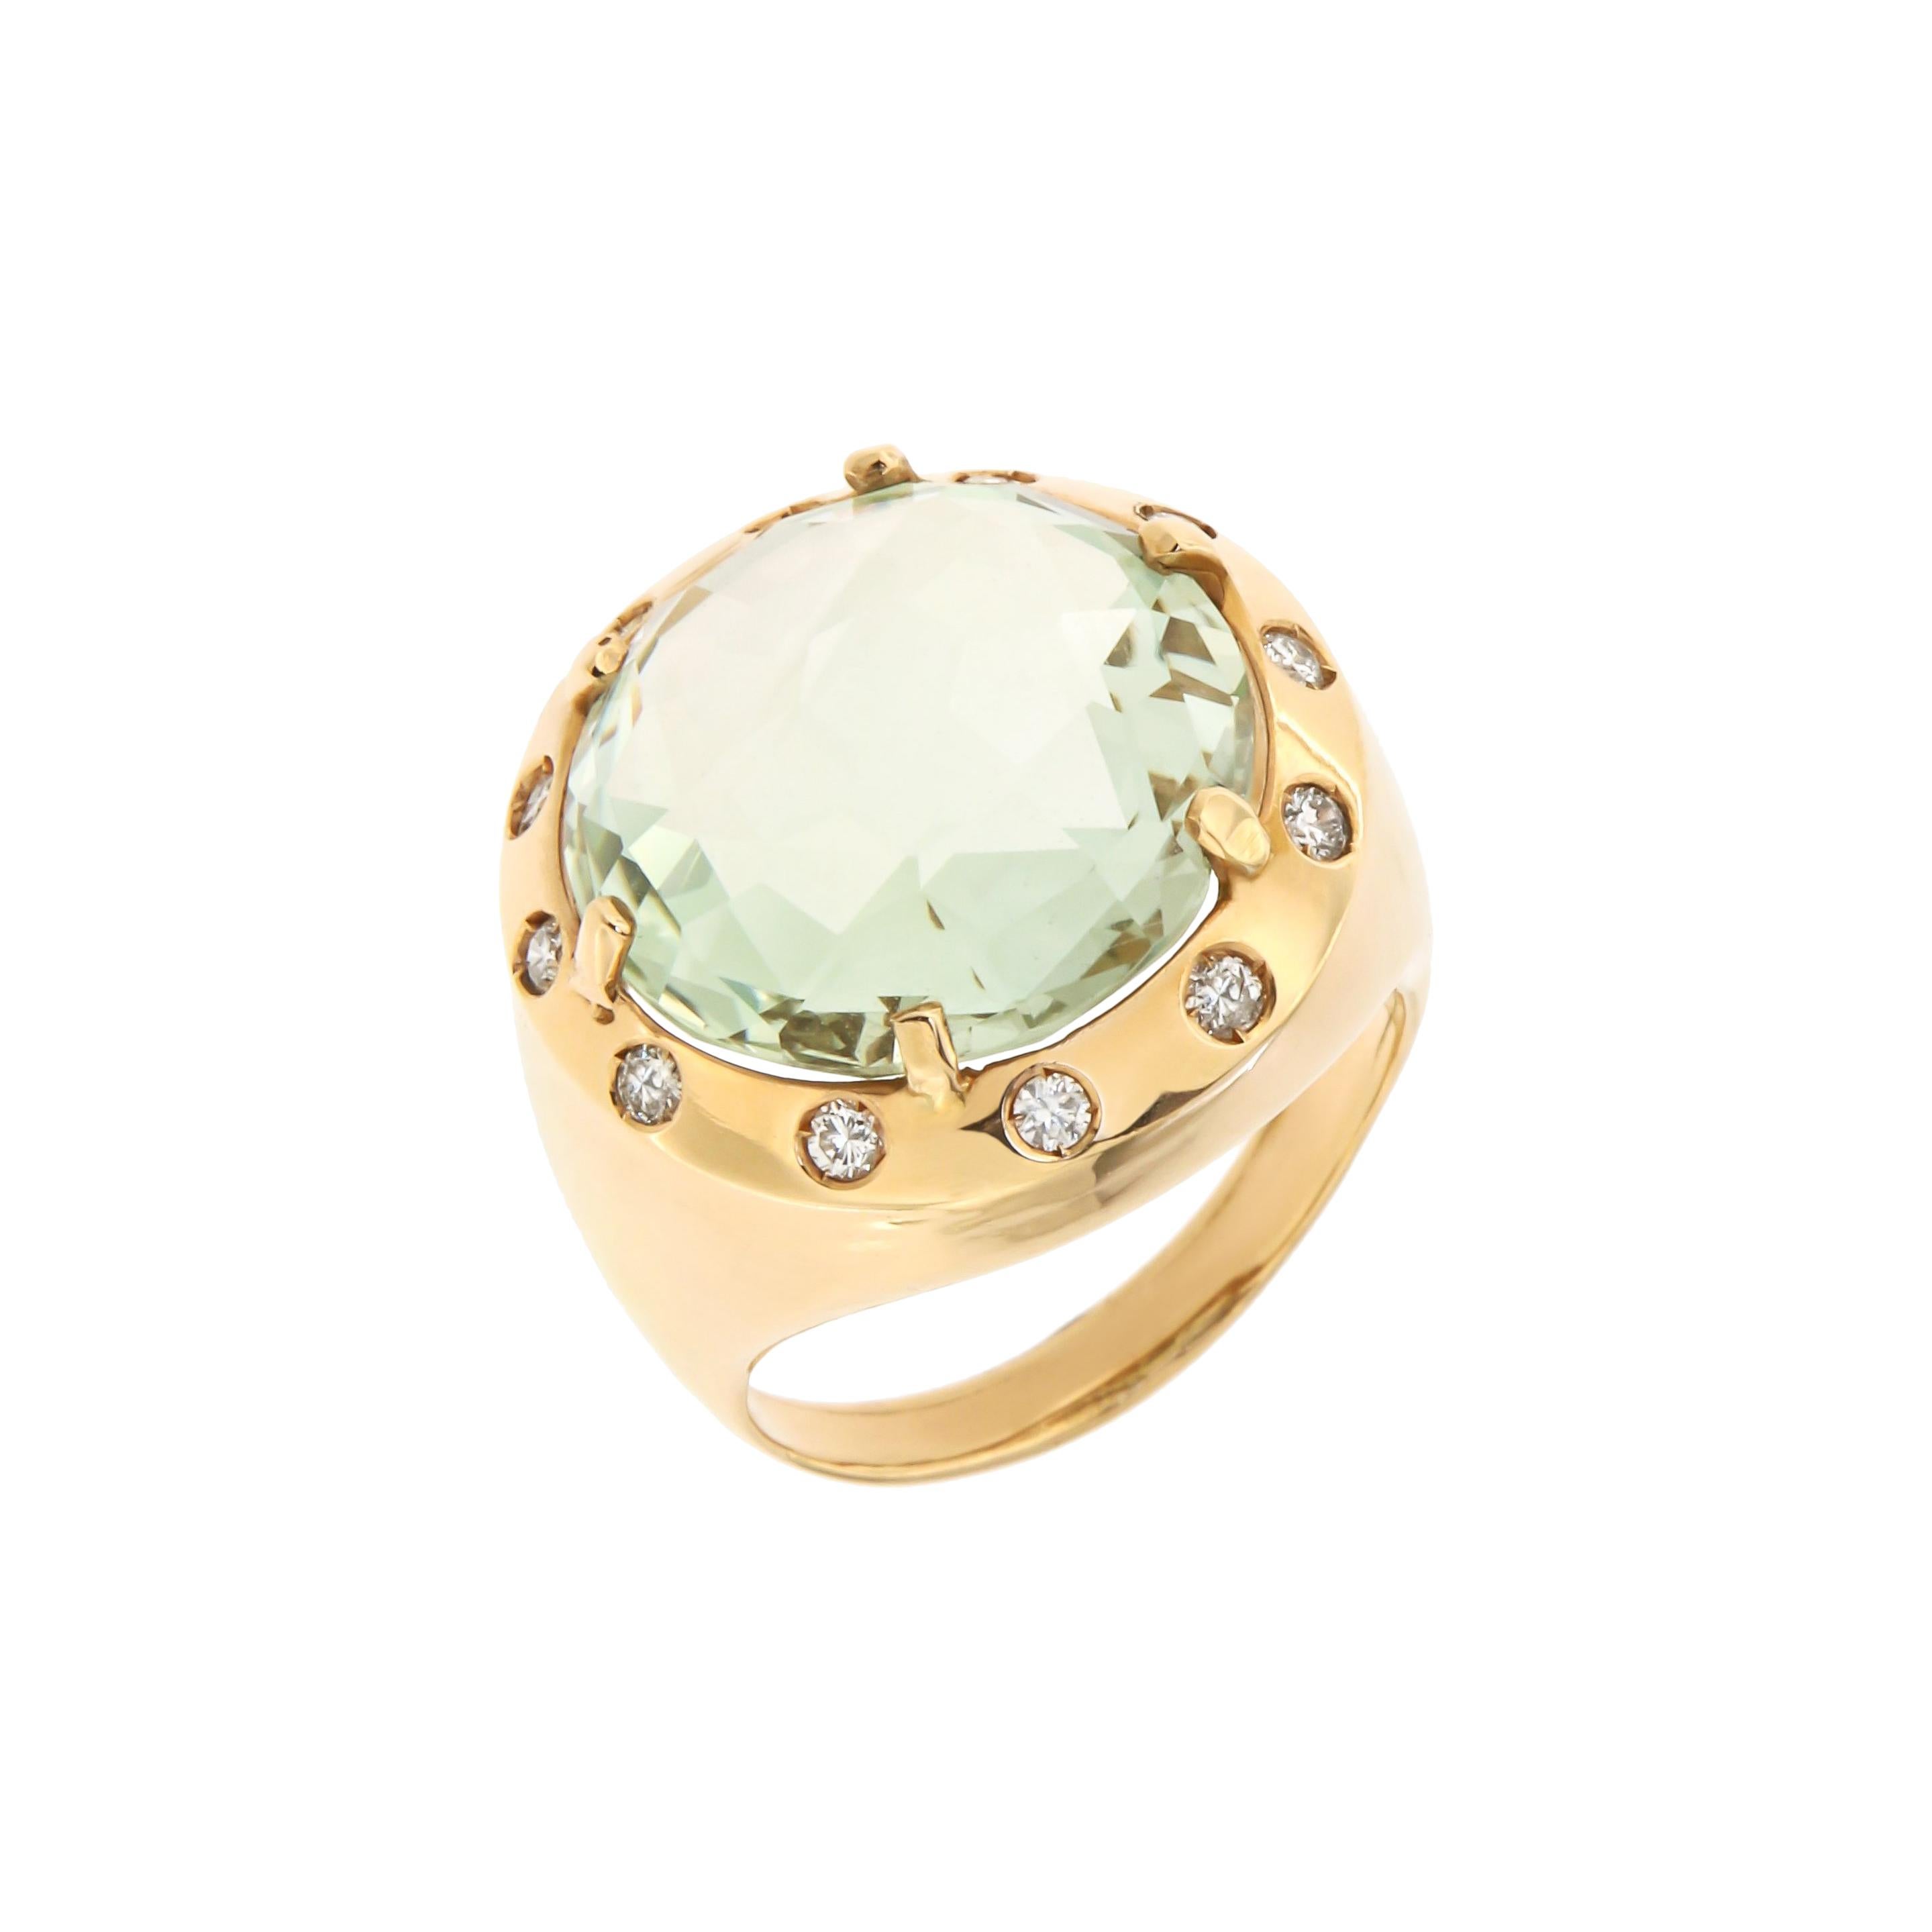 Diamonds Green Amethyst Rose Gold Ring Handcrafted in Italy by Botta Gioielli